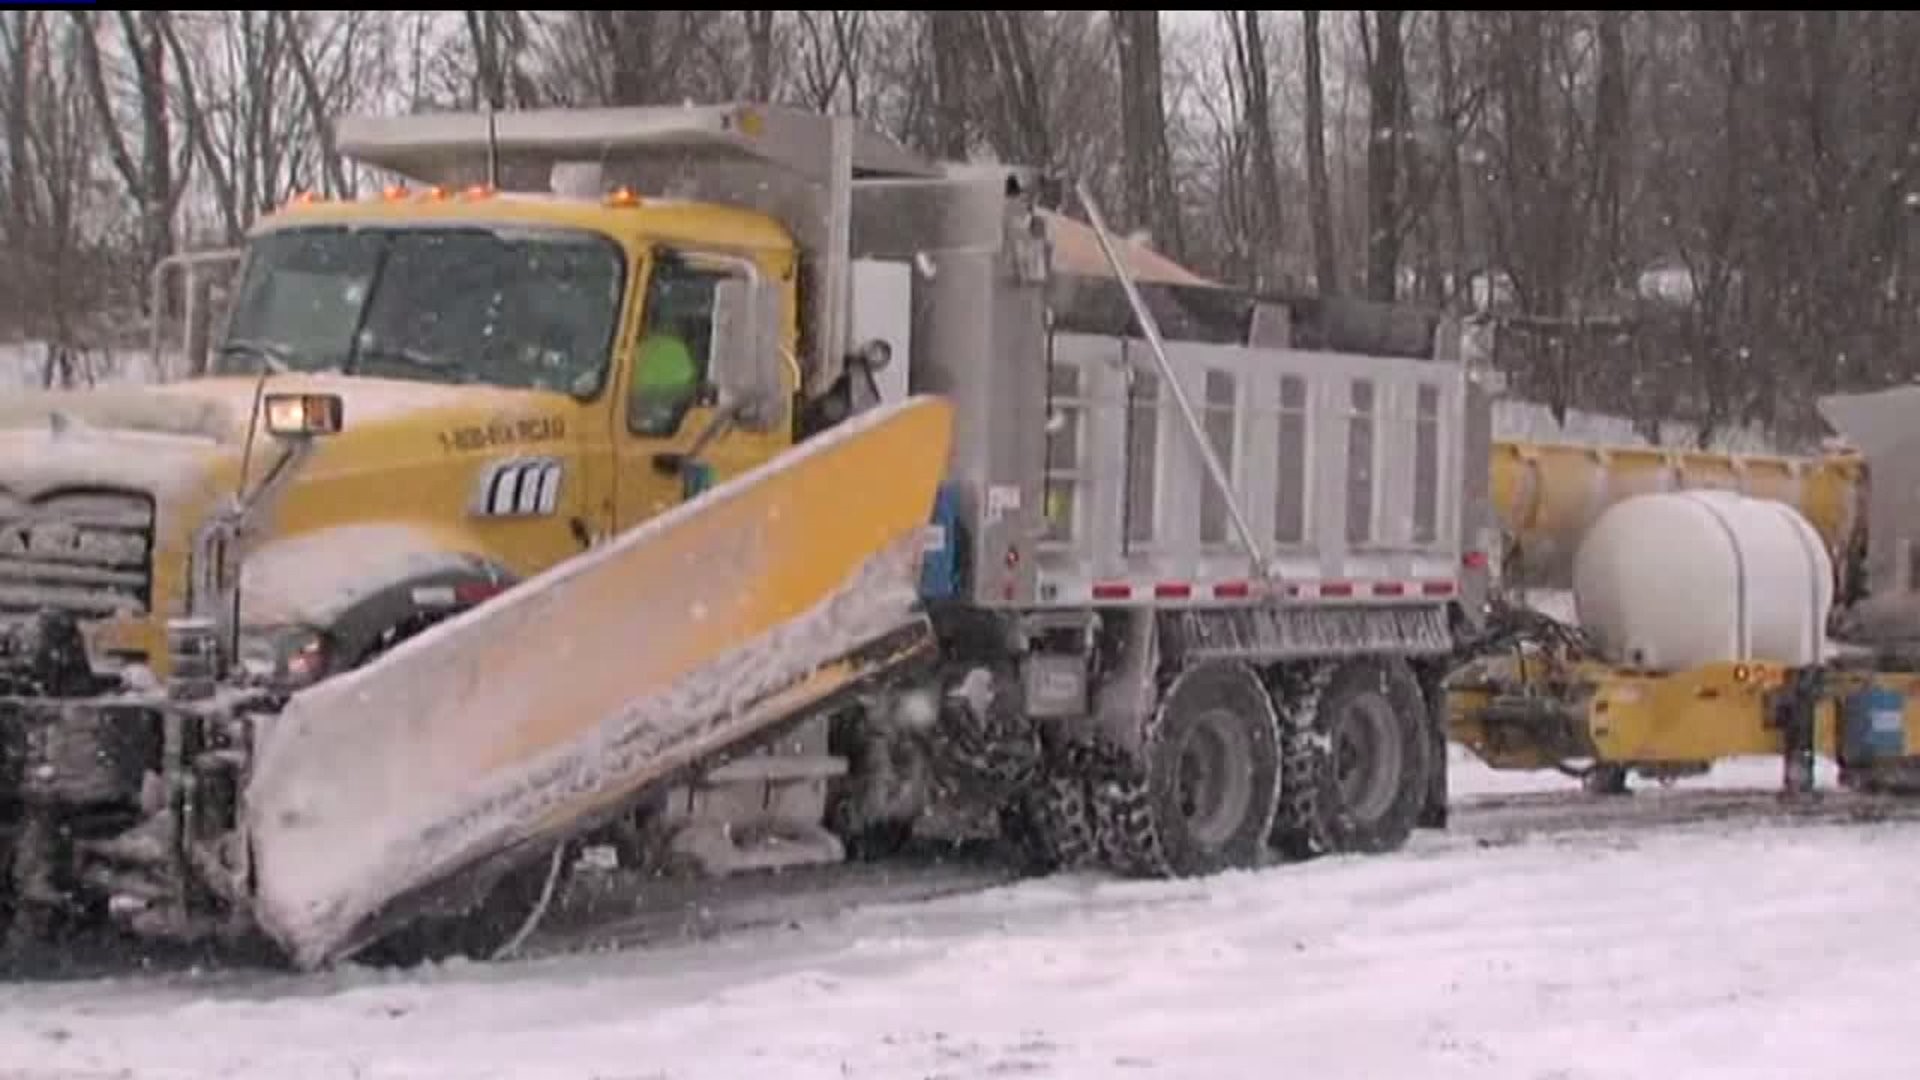 Drawn-out snow conditions bring around the clock work for PennDOT drivers